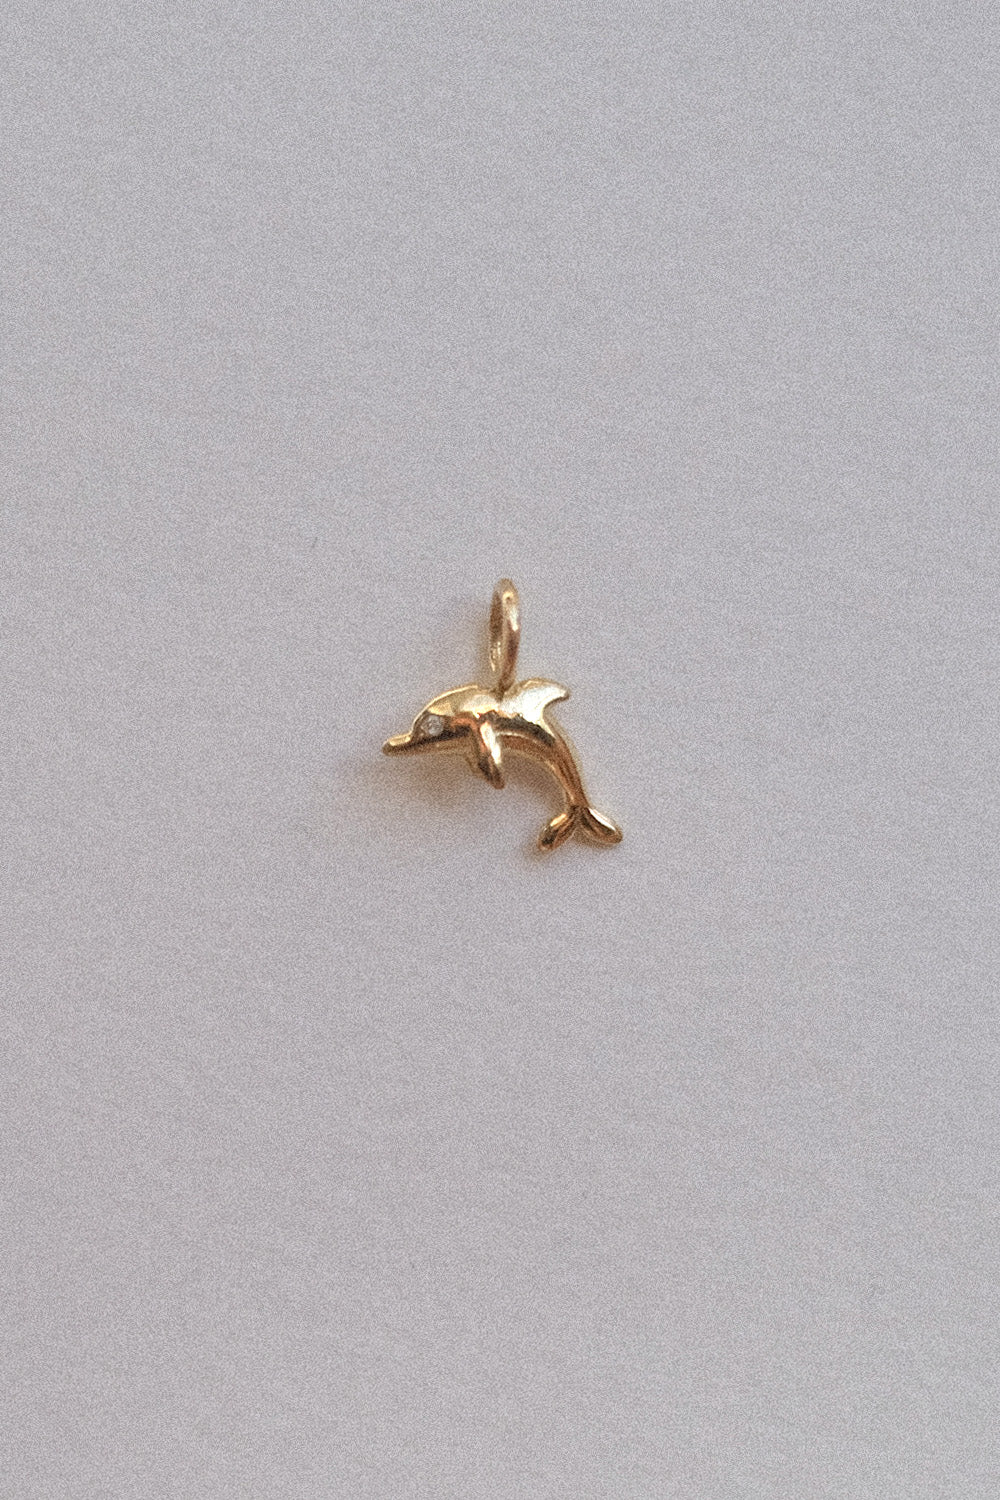 The Fine Gold Dolphin Charm